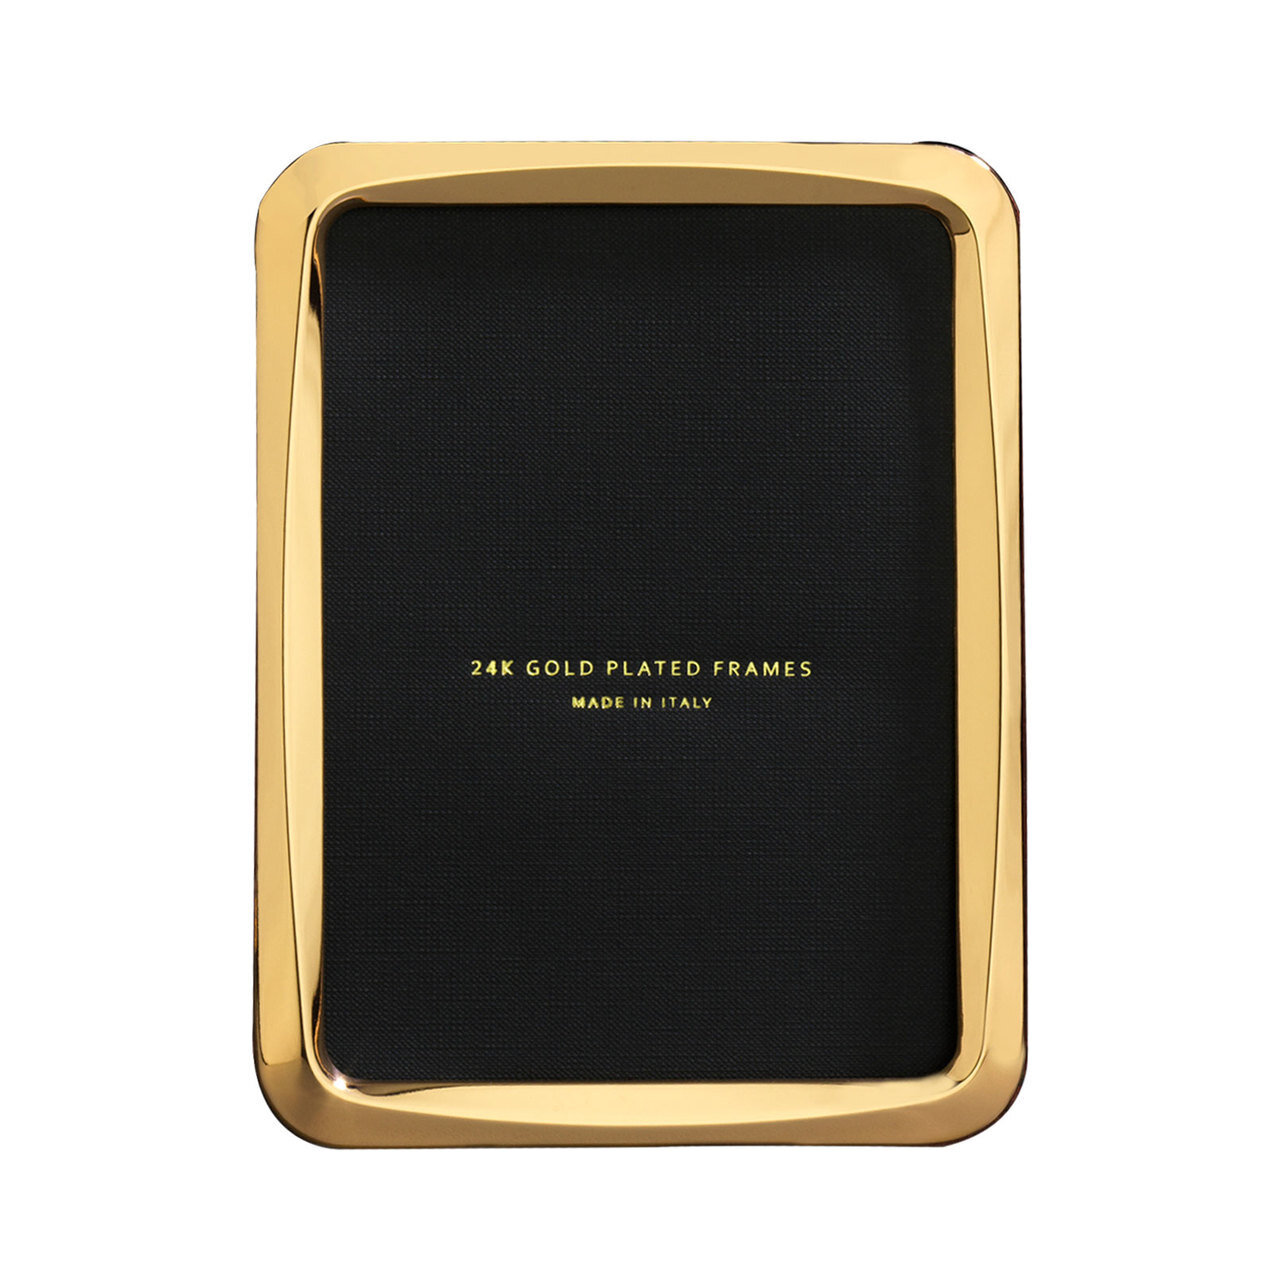 Cunill Nova 8 x 10 Inch Picture Frame - 24k Gold Plated 0.5 Microns